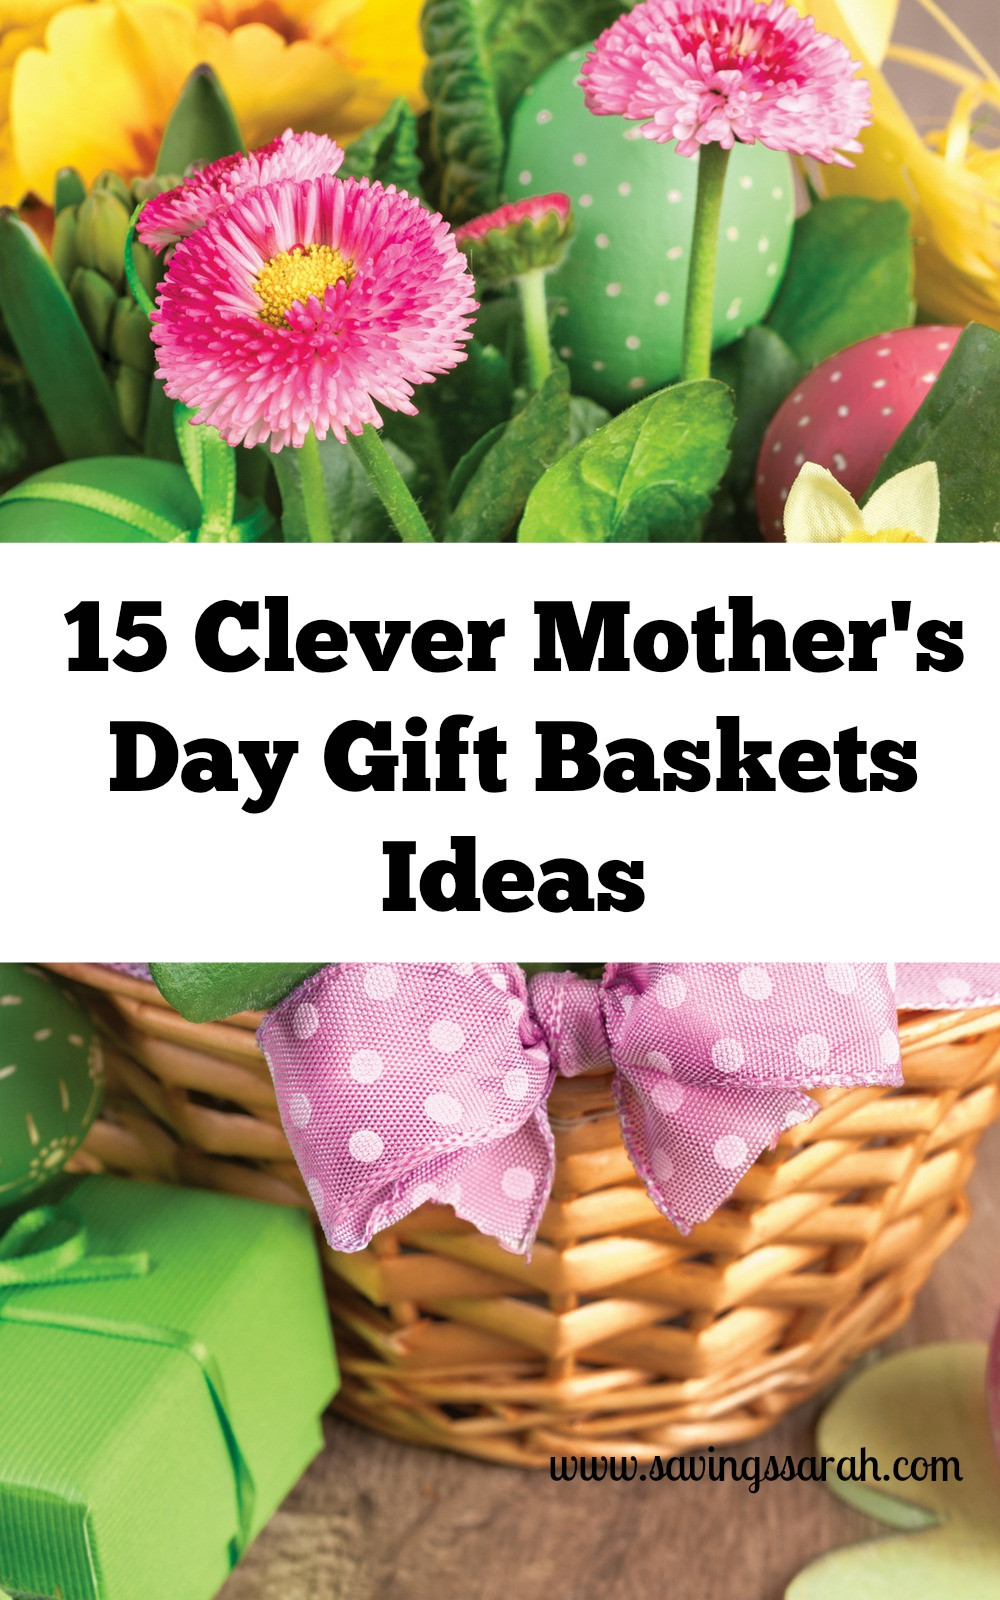 Mother'S Day Gift Basket Ideas
 15 Clever Mother s Day Gift Baskets Ideas Earning and